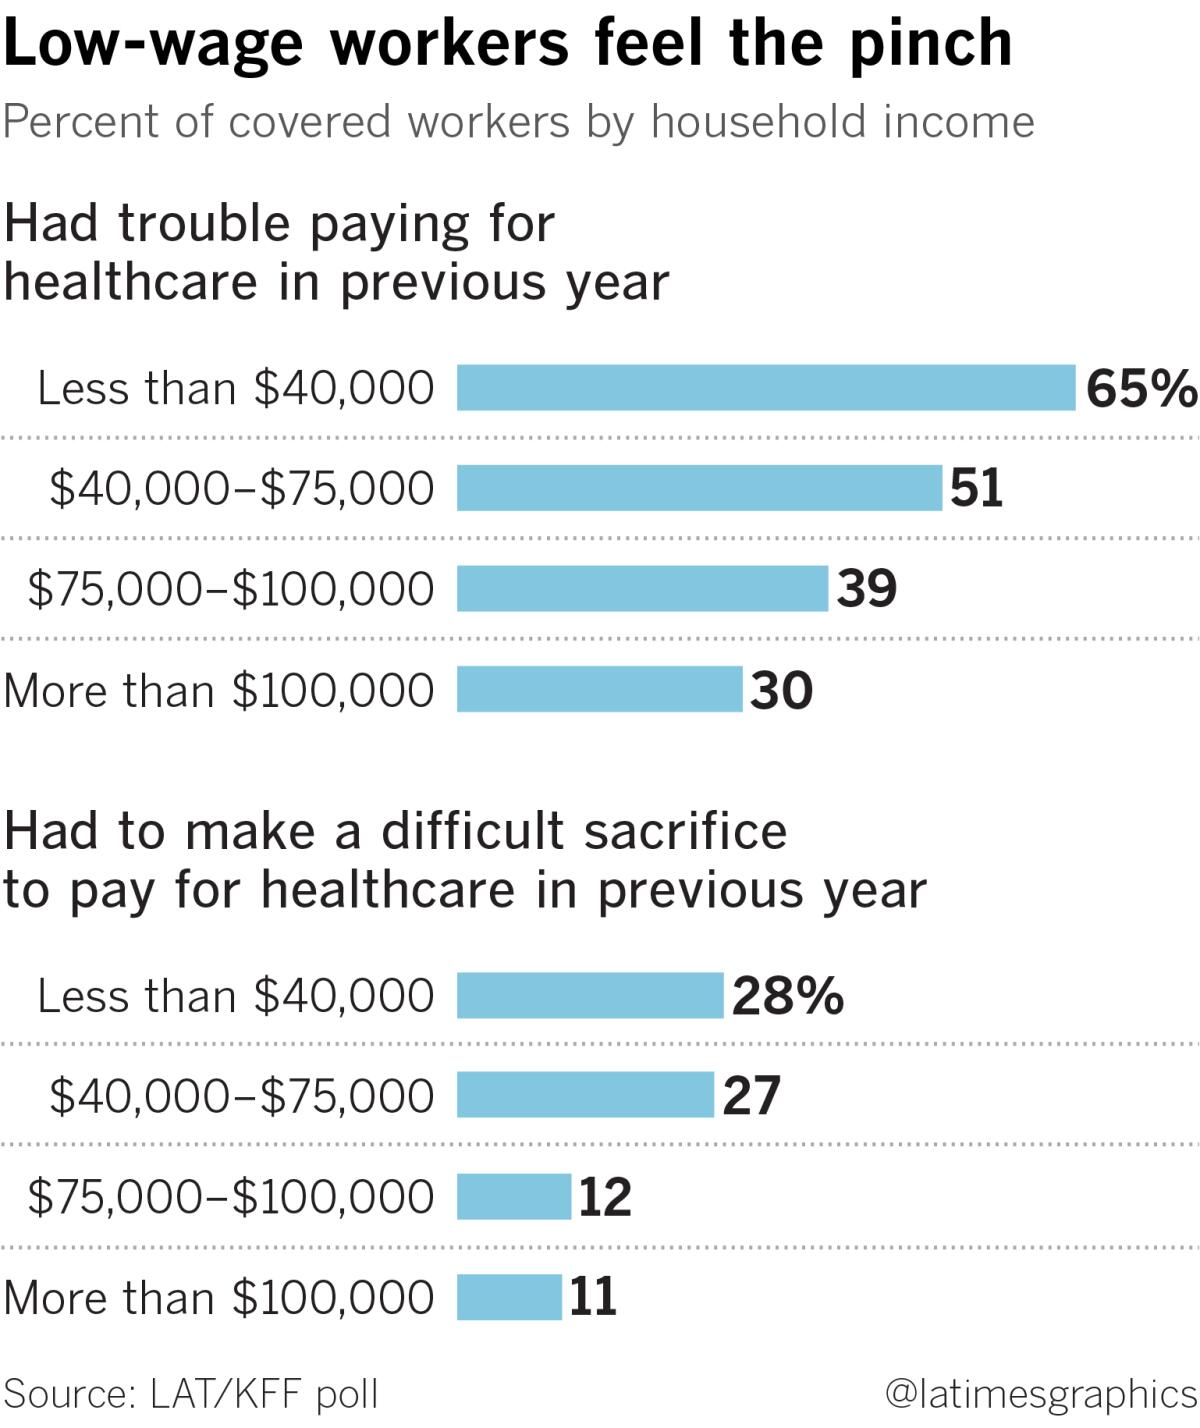 Graphic showing how different income brackets had trouble paying for healthcare